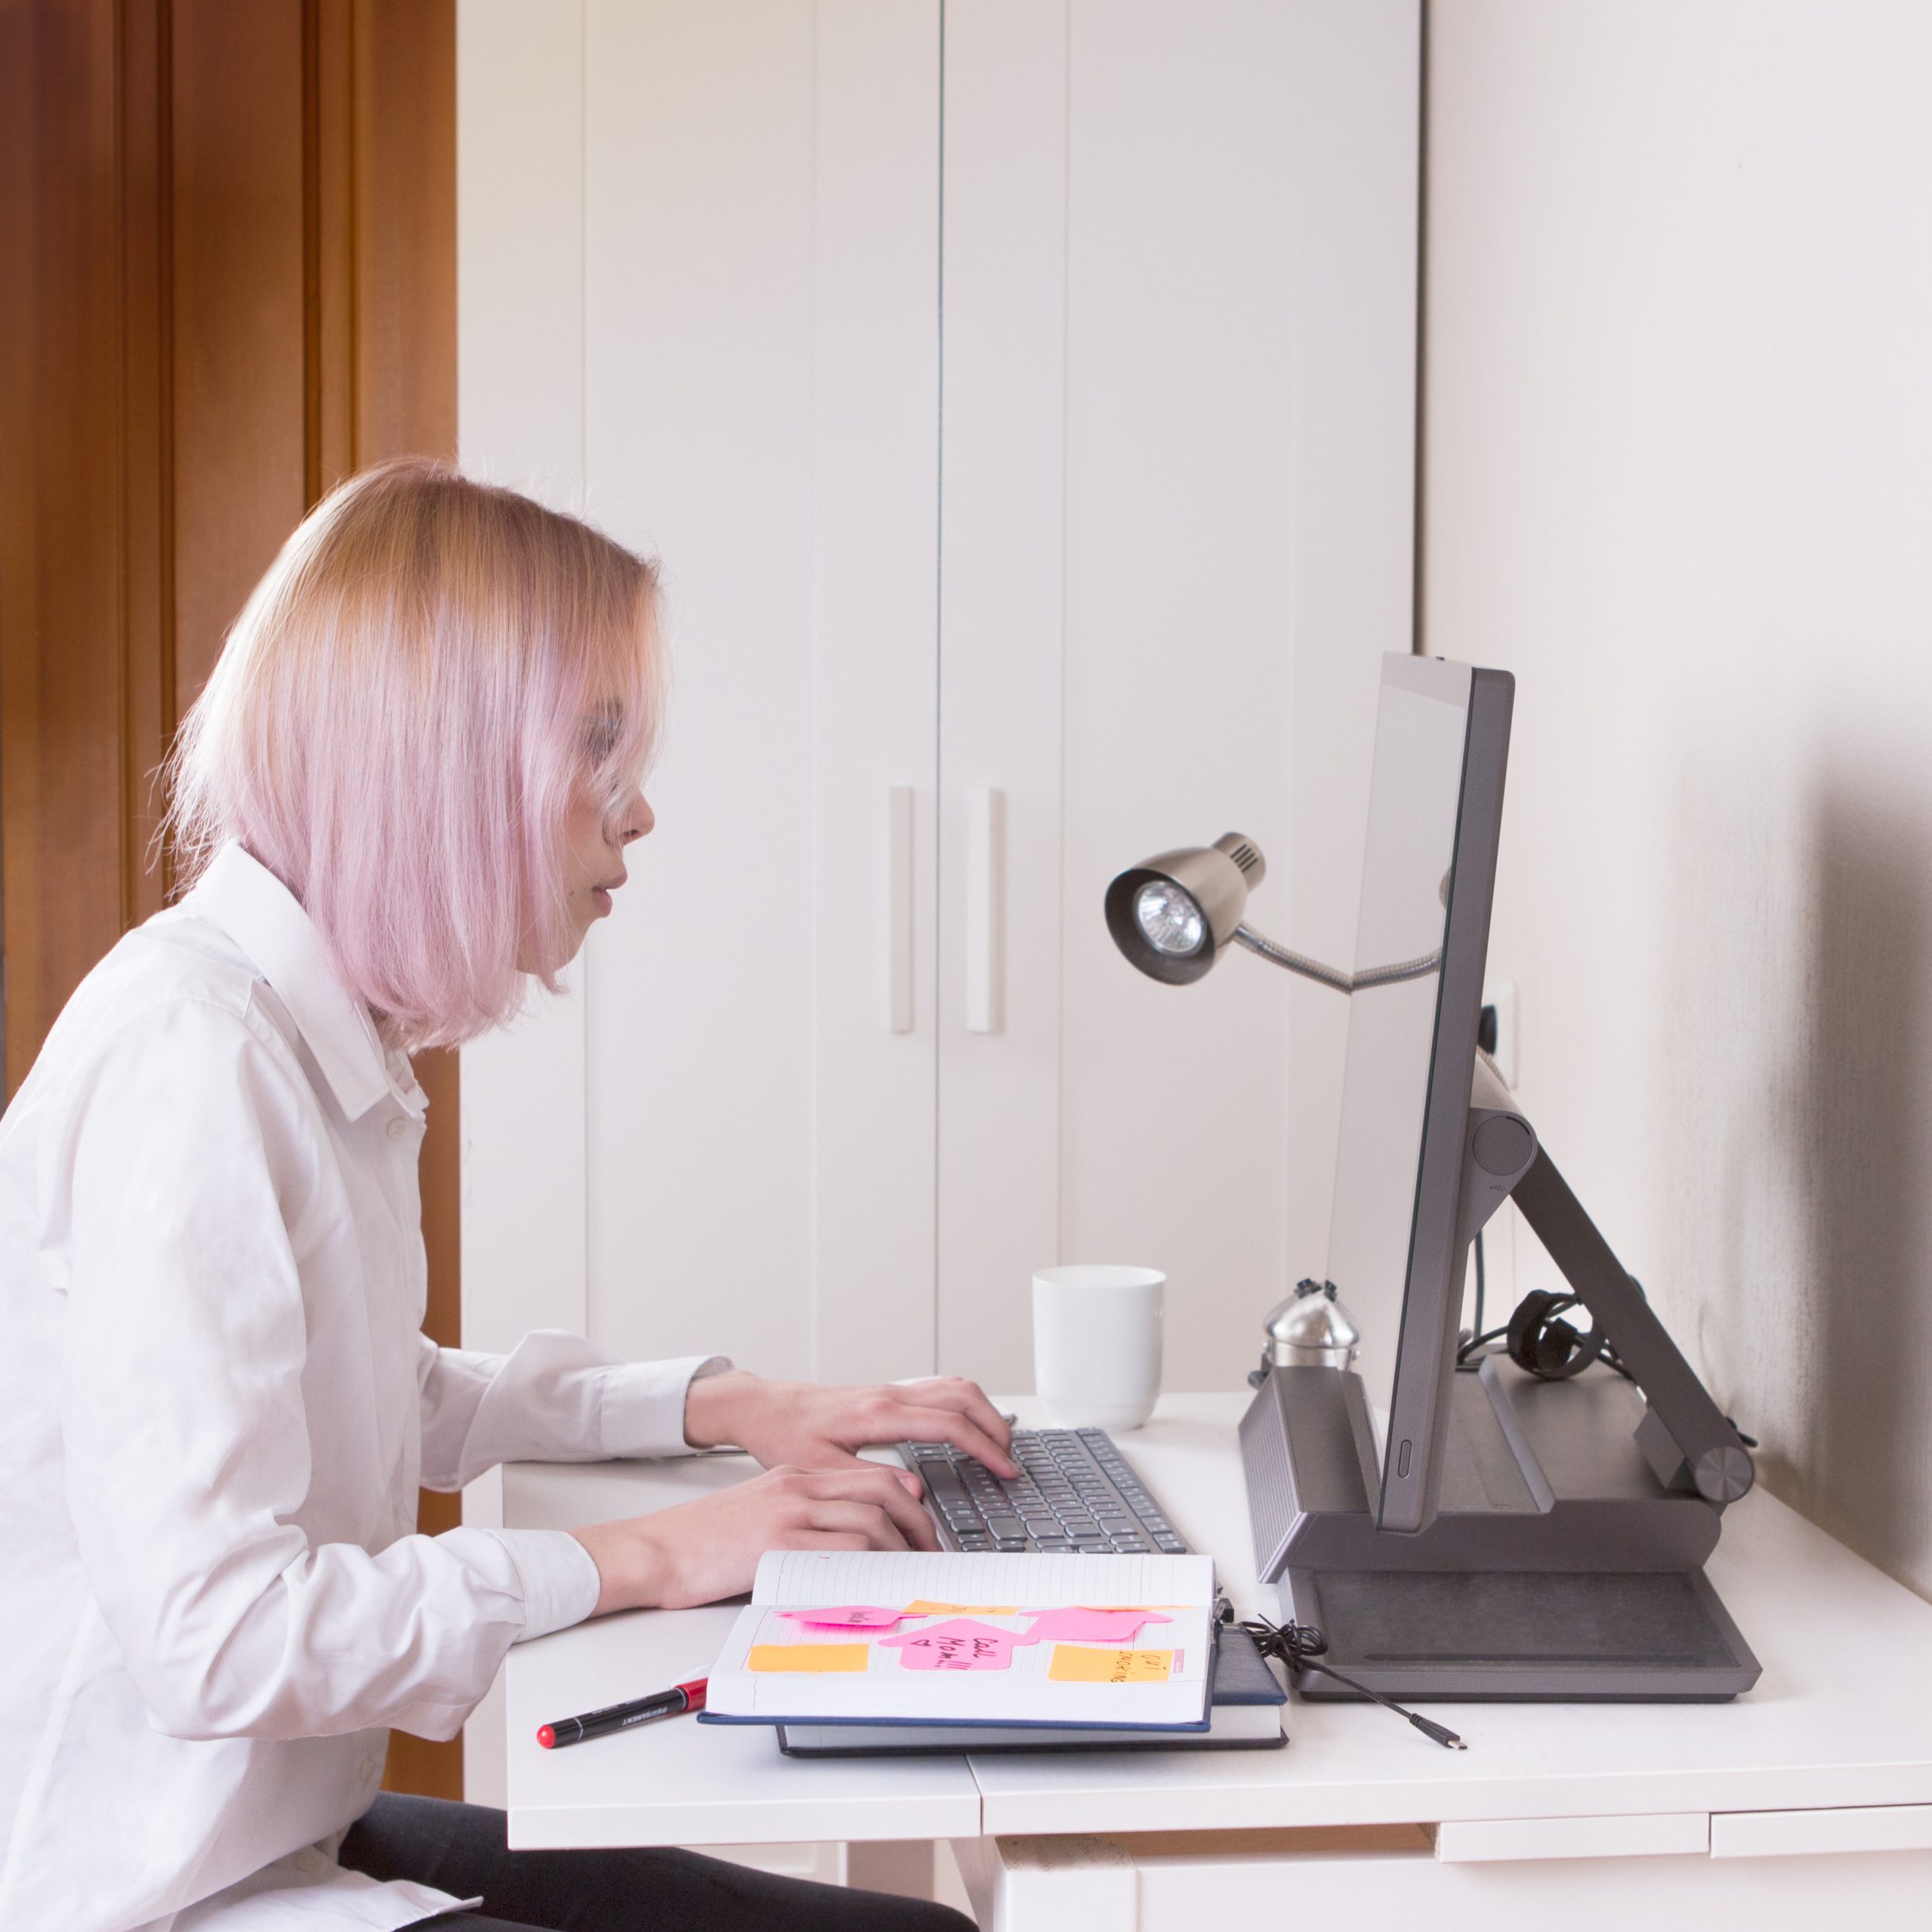 Young girl with pink hair is working at home office on computer, using her all-in-one (AIO PC) desktop.